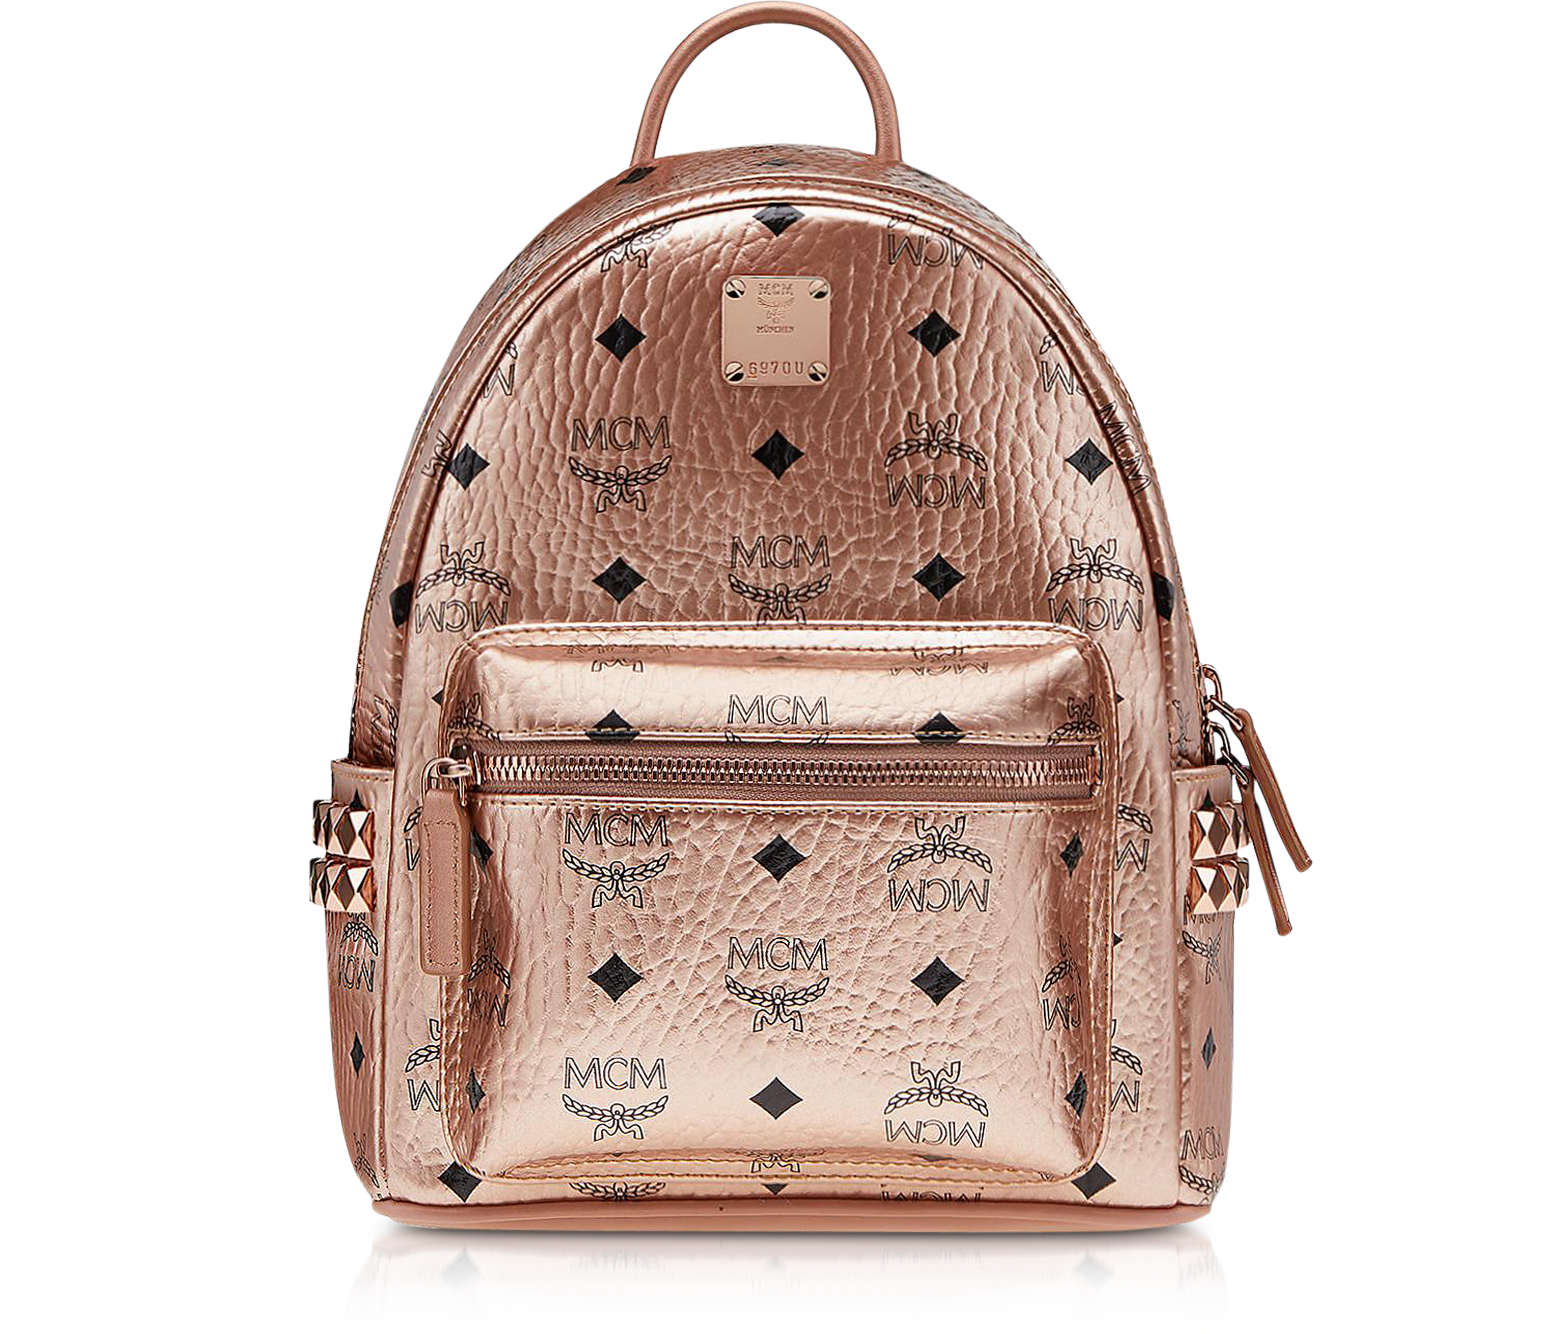 Mcm Small Stark Backpack - Brown